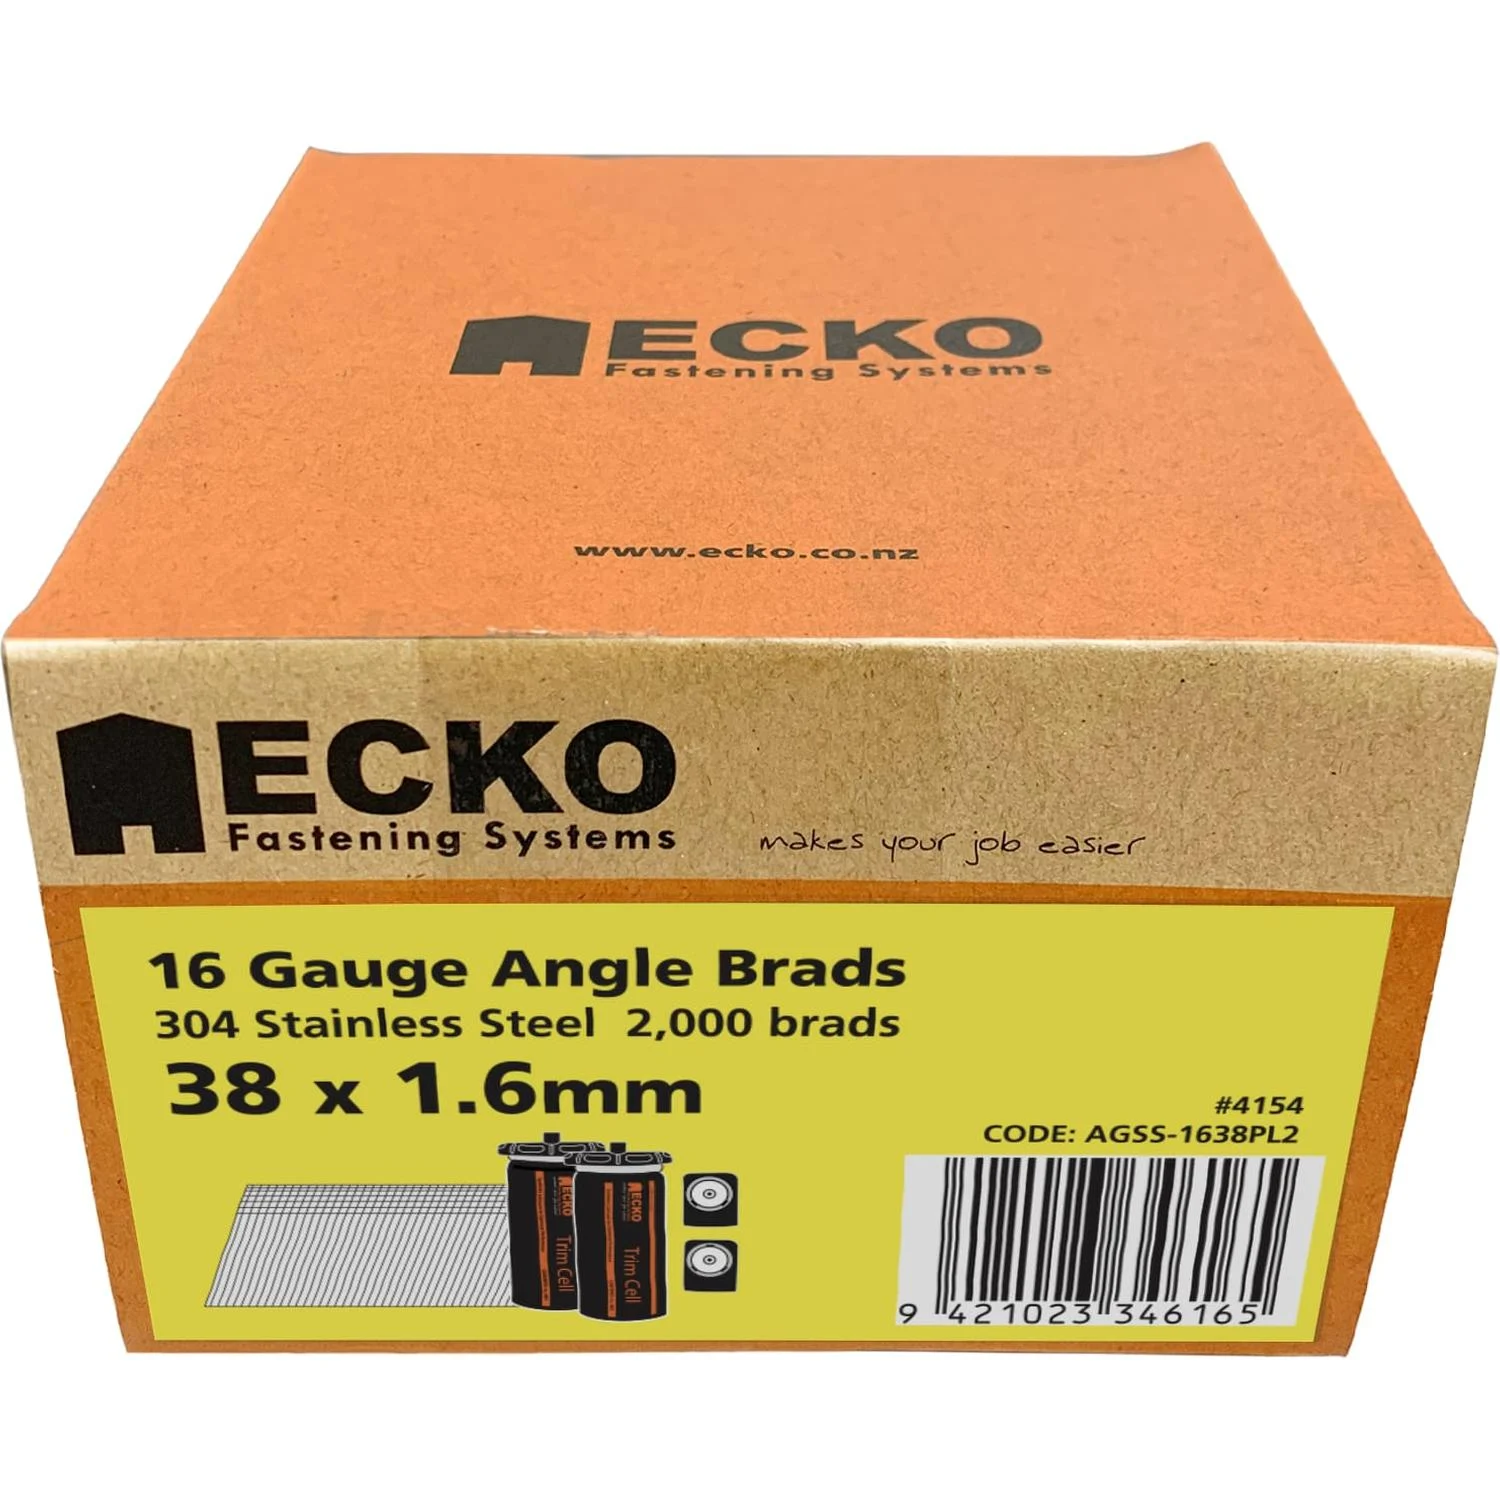 Ecko 16 Gauge Angle Brads Gas Pack 38 X 1.6Mm 304 Stainless Steel (2000)